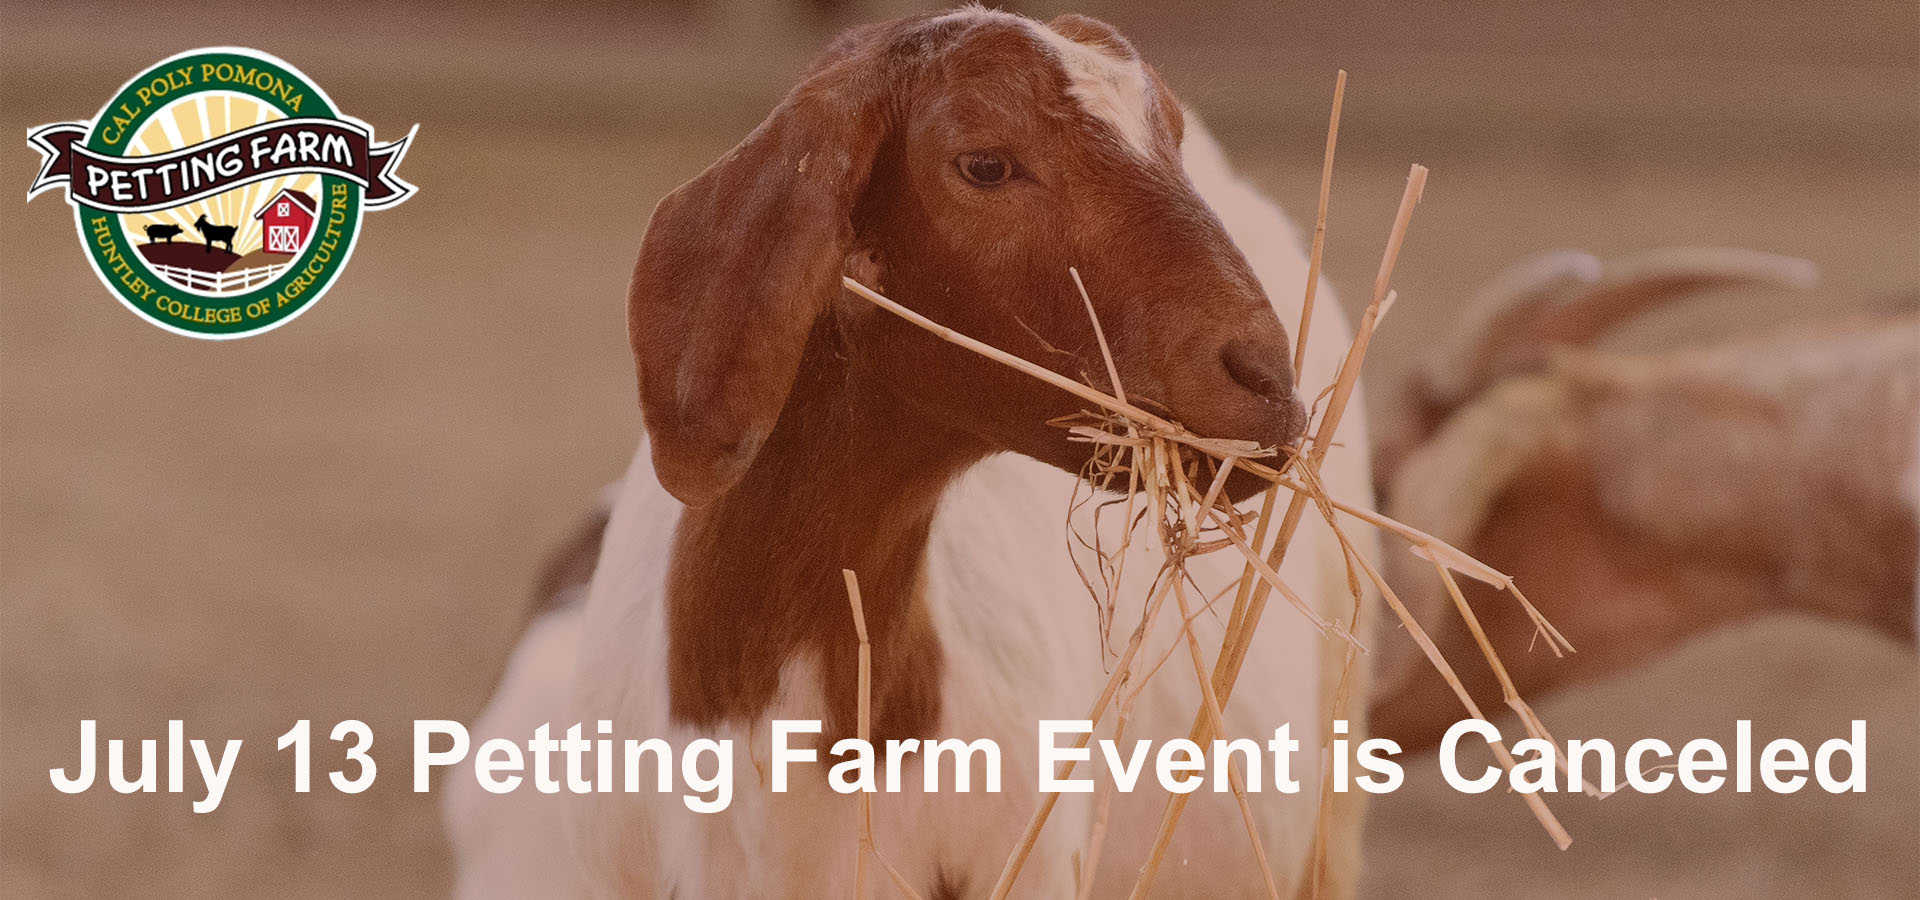 Slide reads: "July 13 Petting Farm Event Canceled"